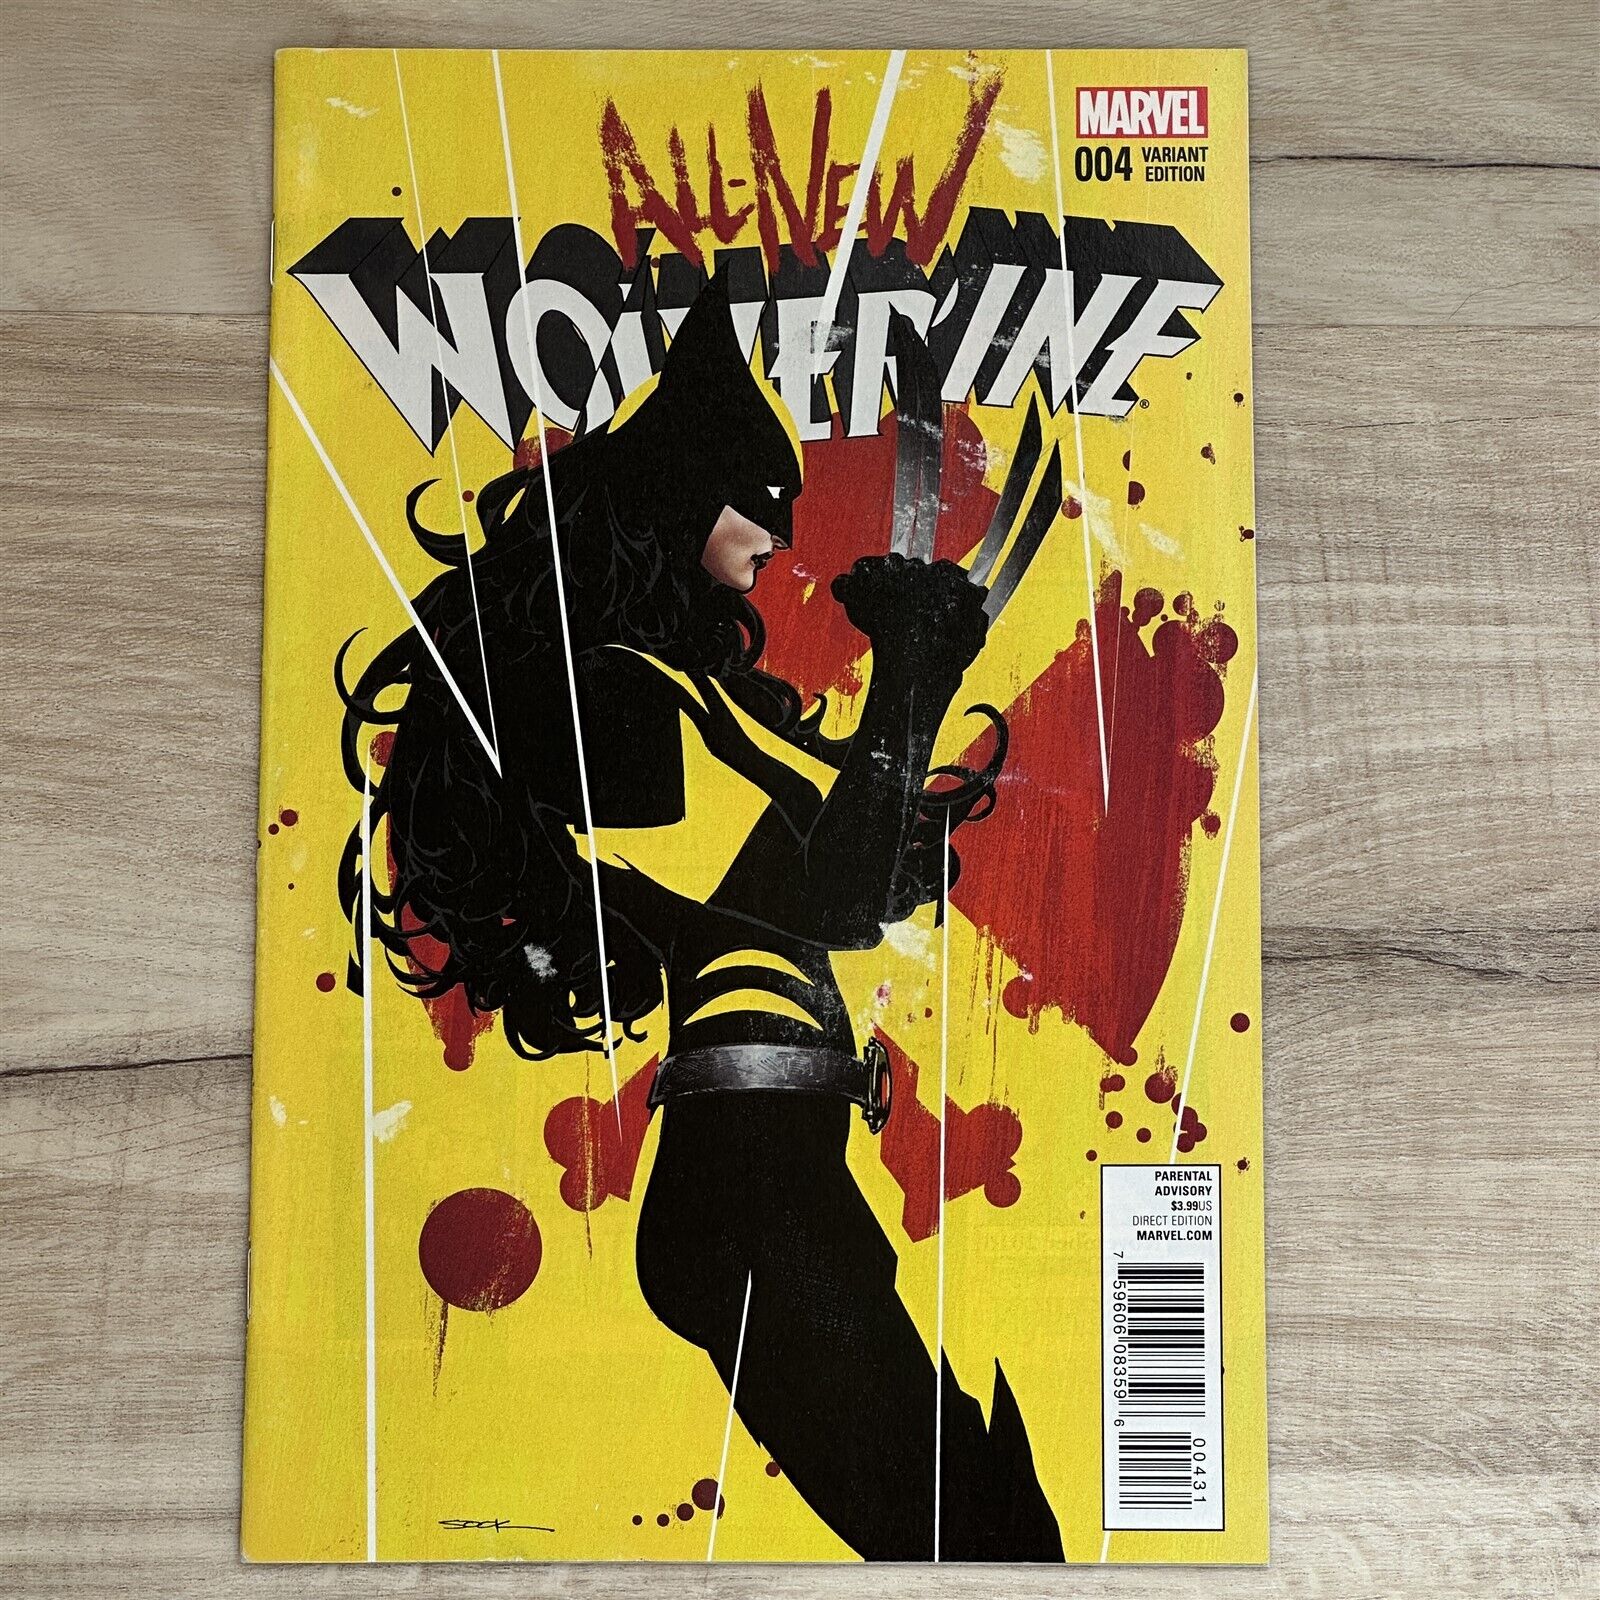 ALL-NEW WOLVERINE #4 2016 1:25 RYAN SOOK VARIANT INCENTIVE COVERS MARVEL COMICS